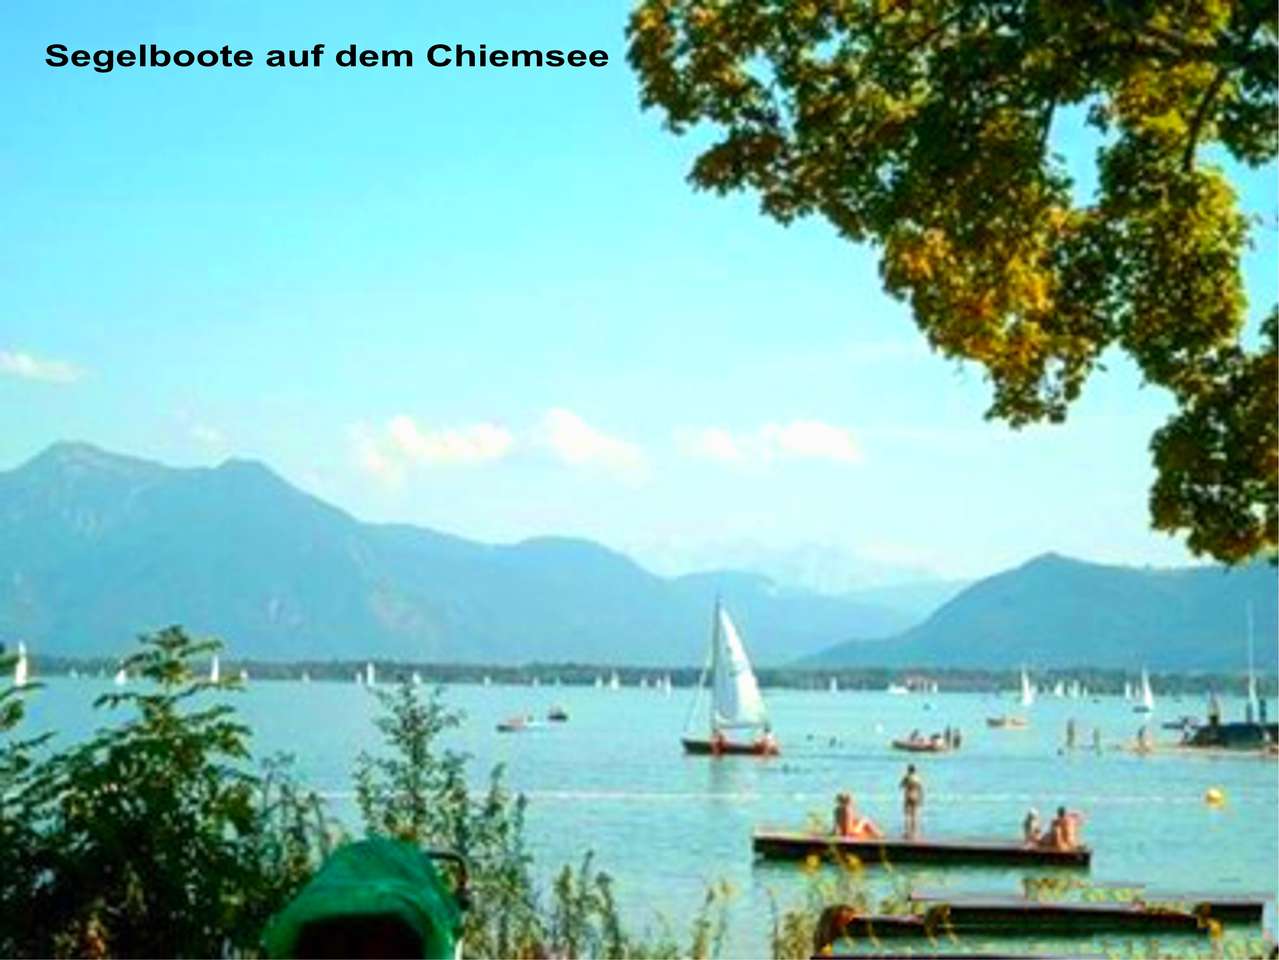 Pohled na Chiemsee online puzzle